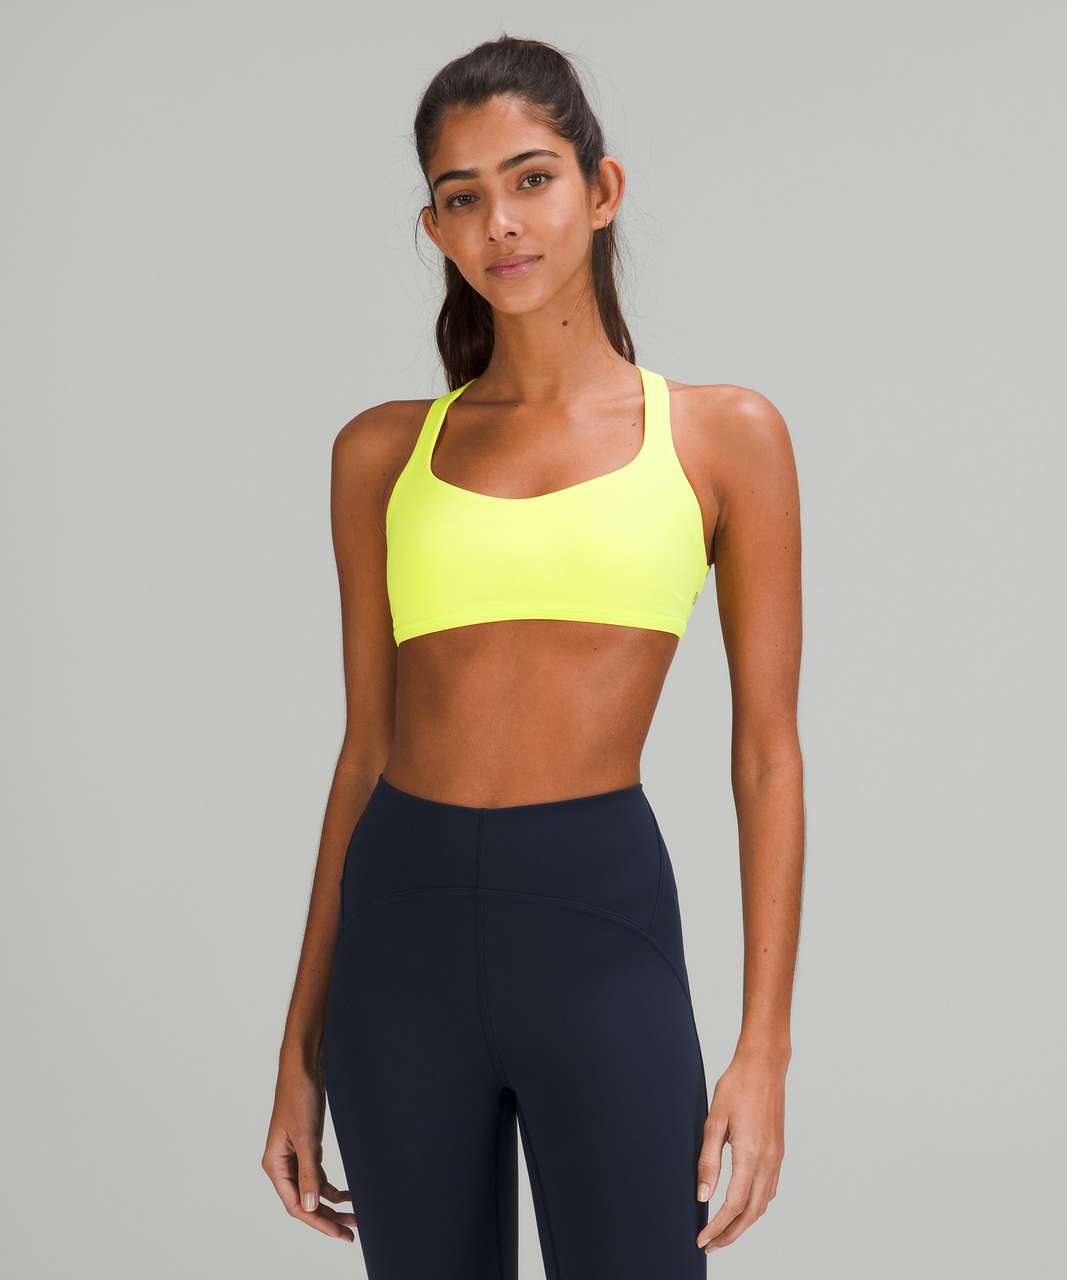 Lululemon Free to Be Bra - Wild *Light Support, A/B Cup - Electric Lemon